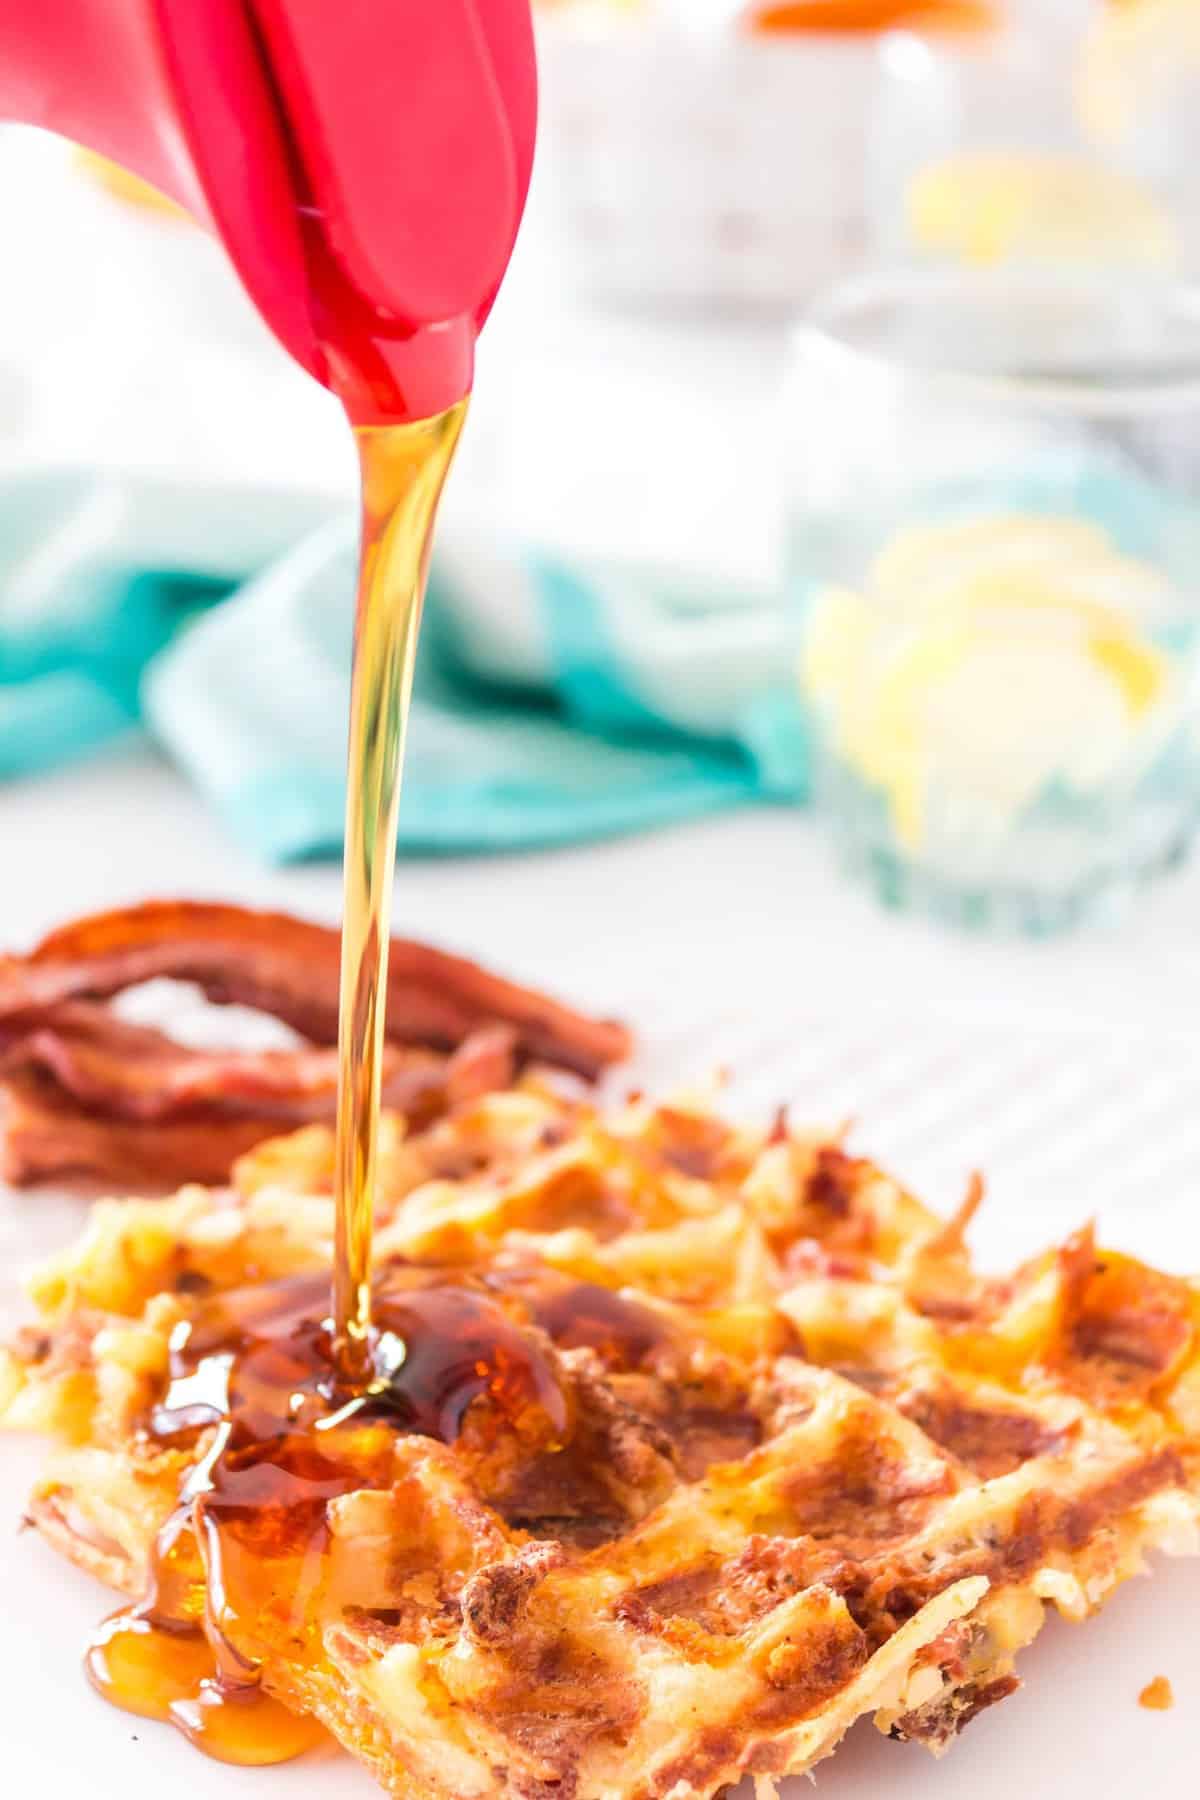 Syrup being poured on a hash brown waffle.